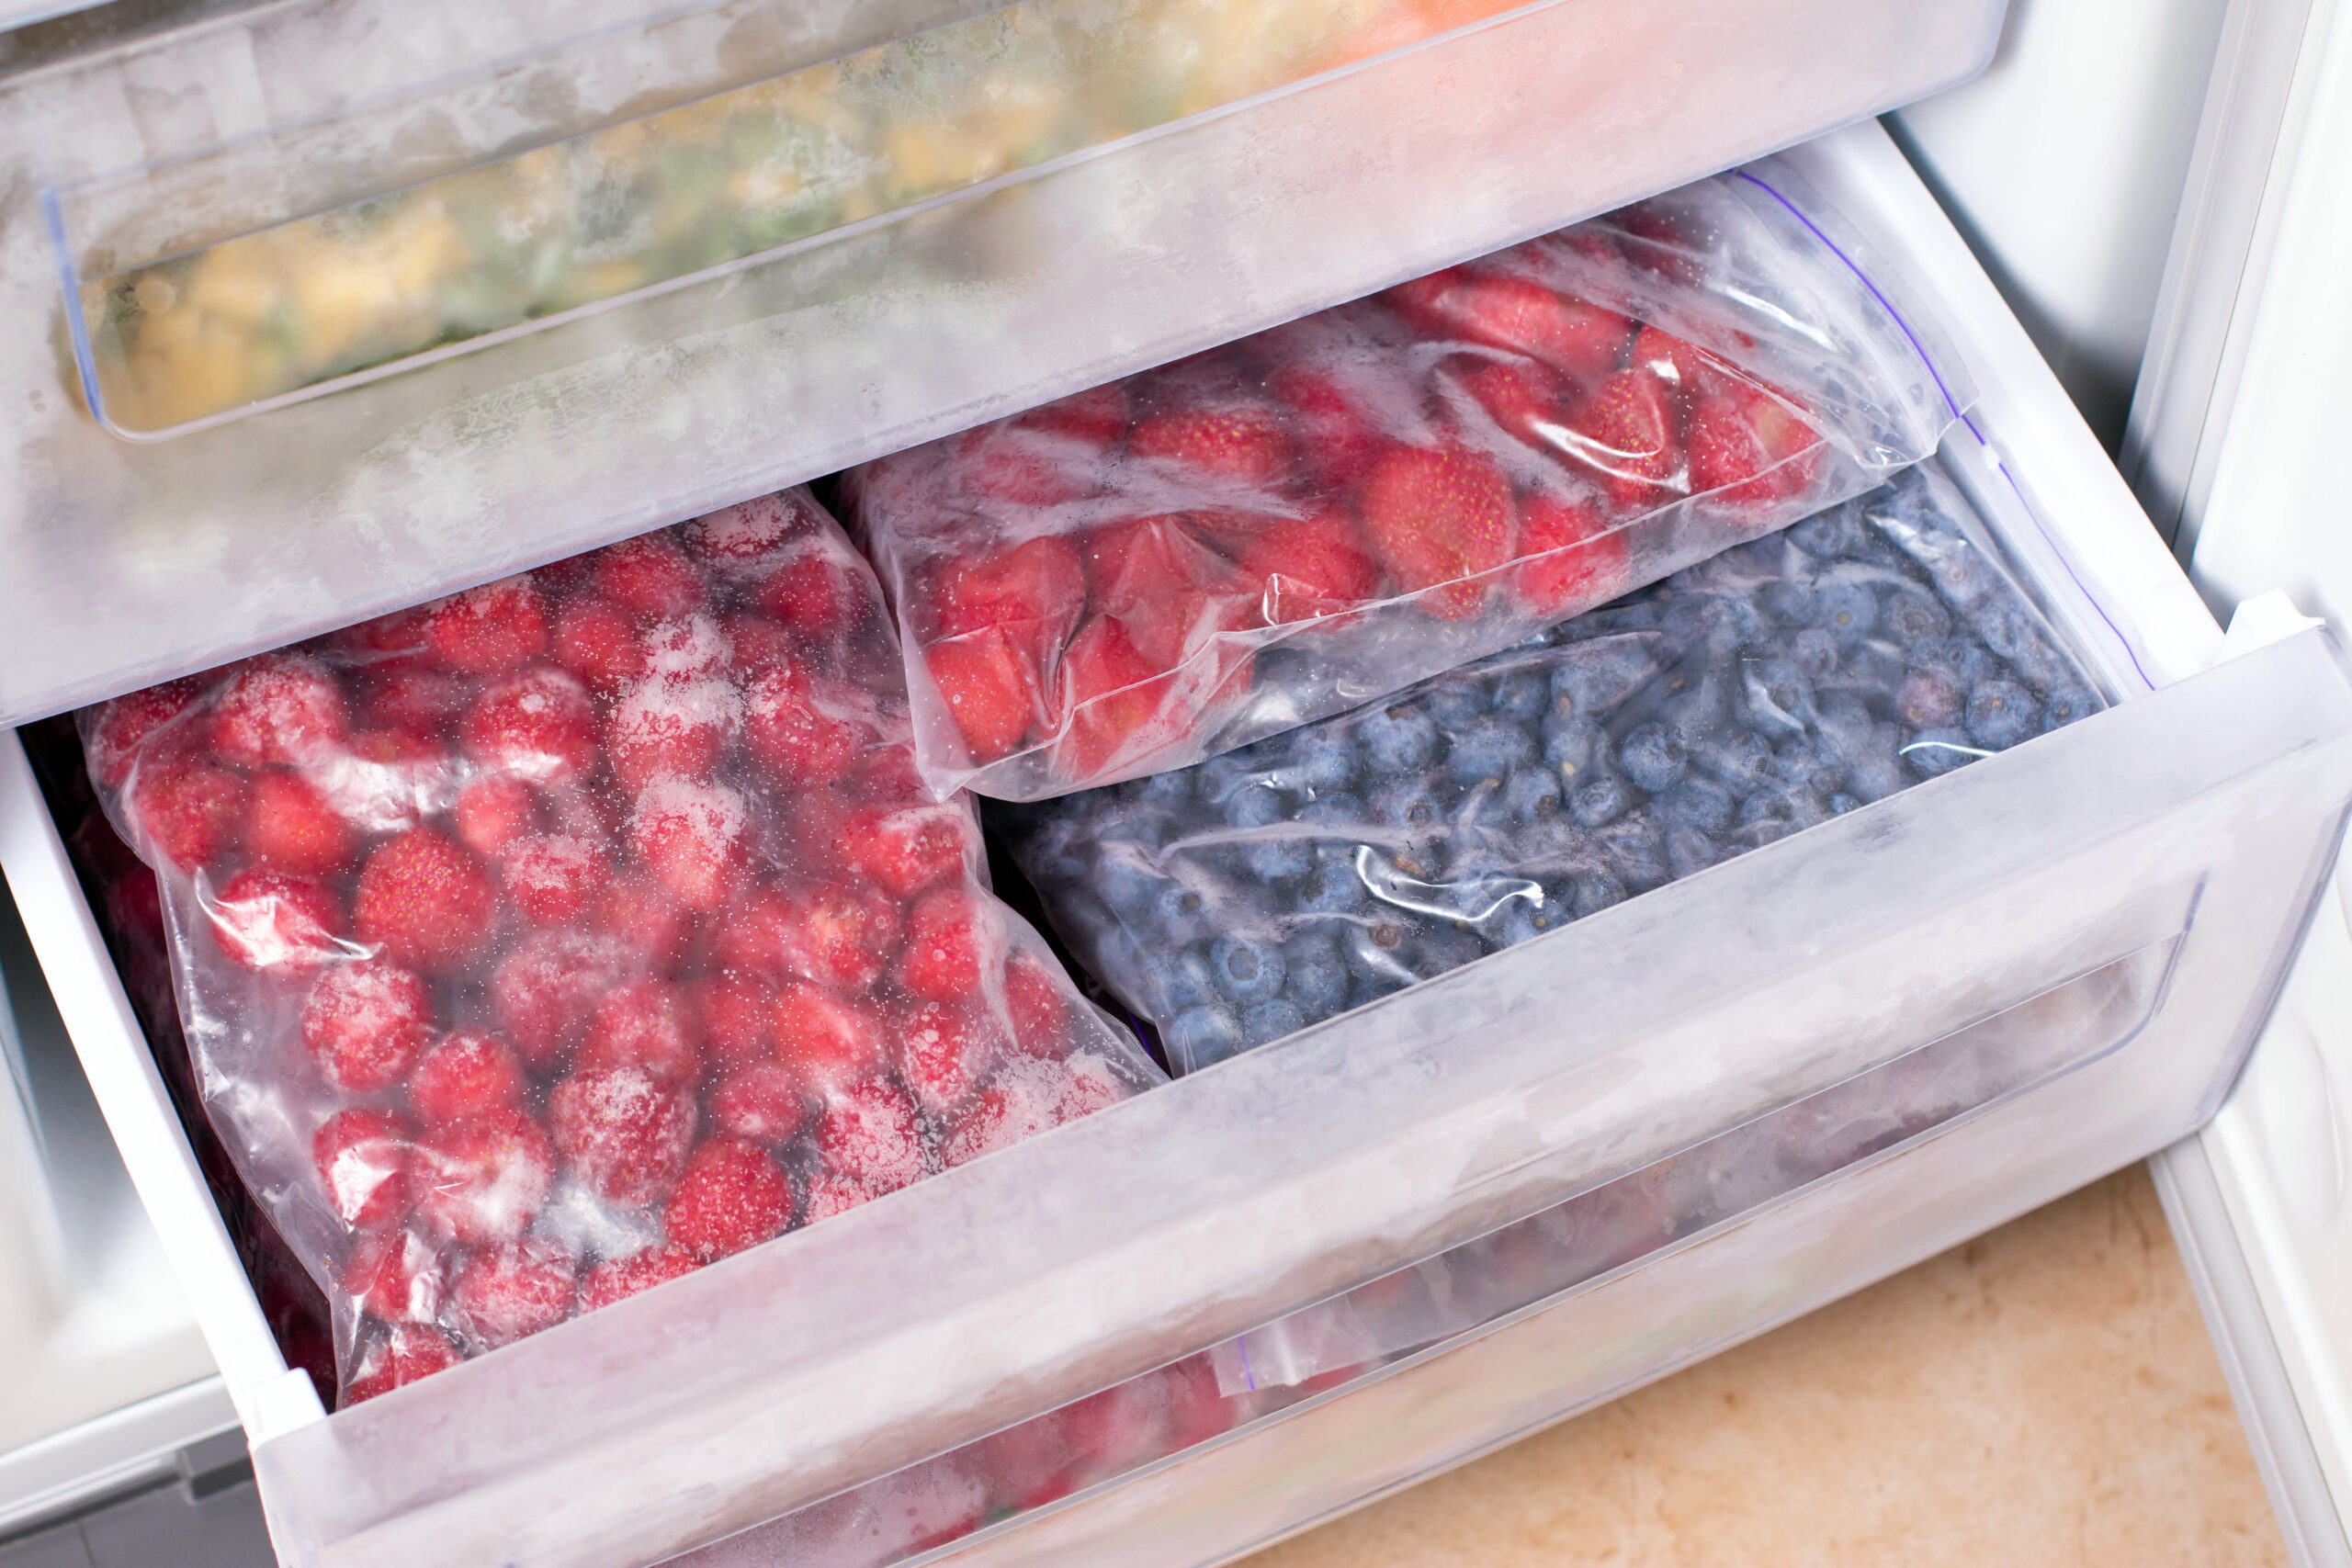 Huge Nationwide Recall of Frozen Fruit From Aldi, Costco & More